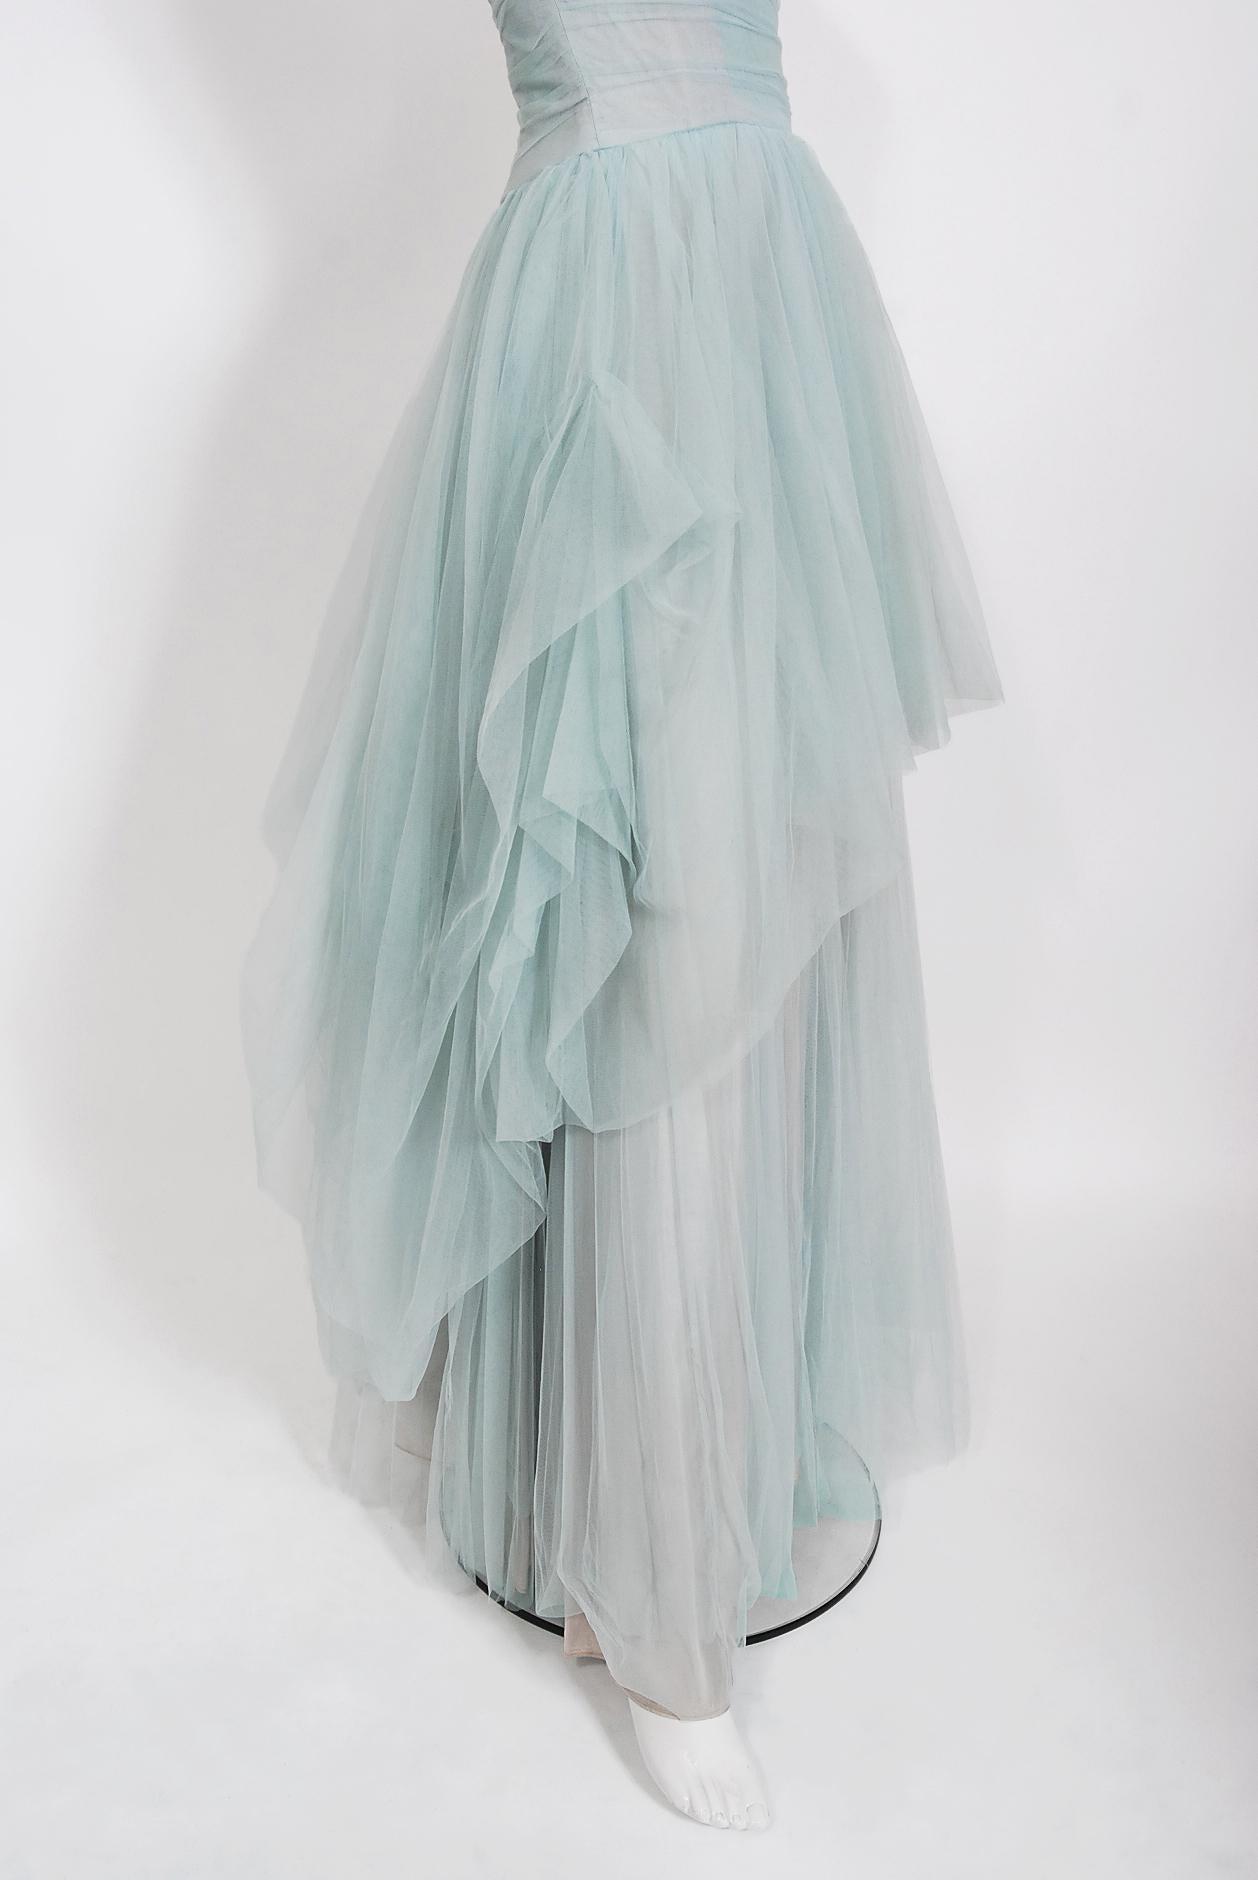 Women's Vintage 1950's Ceil Chapman Light-Blue Tulle Strapless Ruched Full-Length Gown